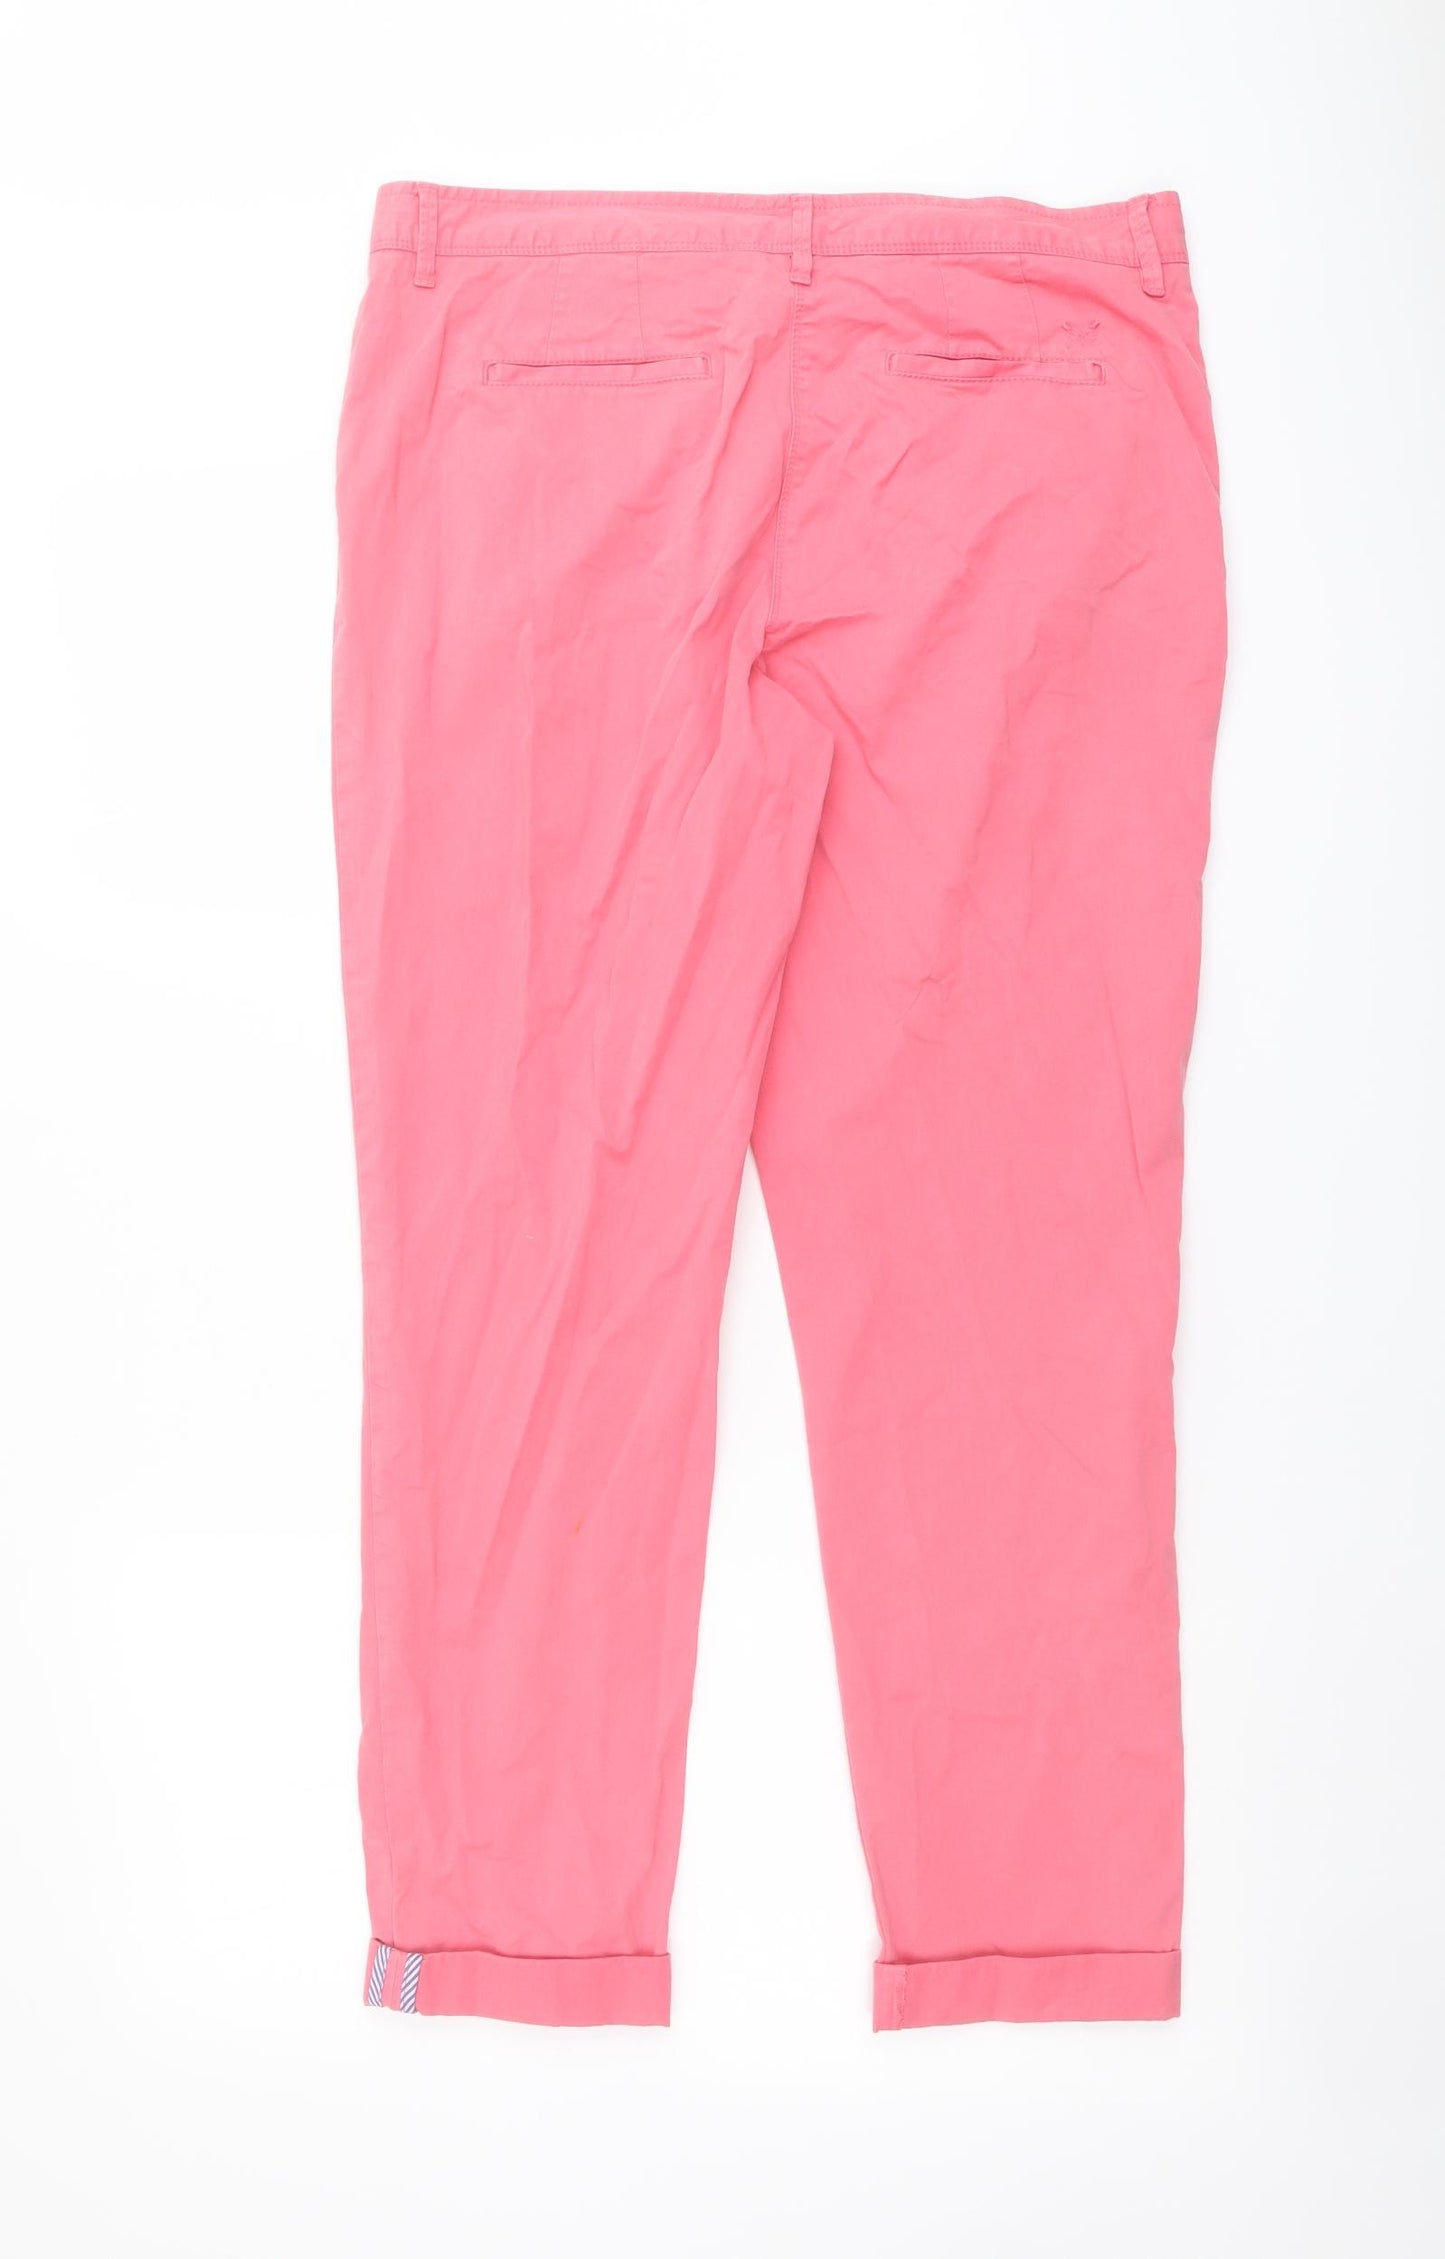 Crew Clothing Womens Pink Cotton Chino Trousers Size 10 L26 in Regular Button